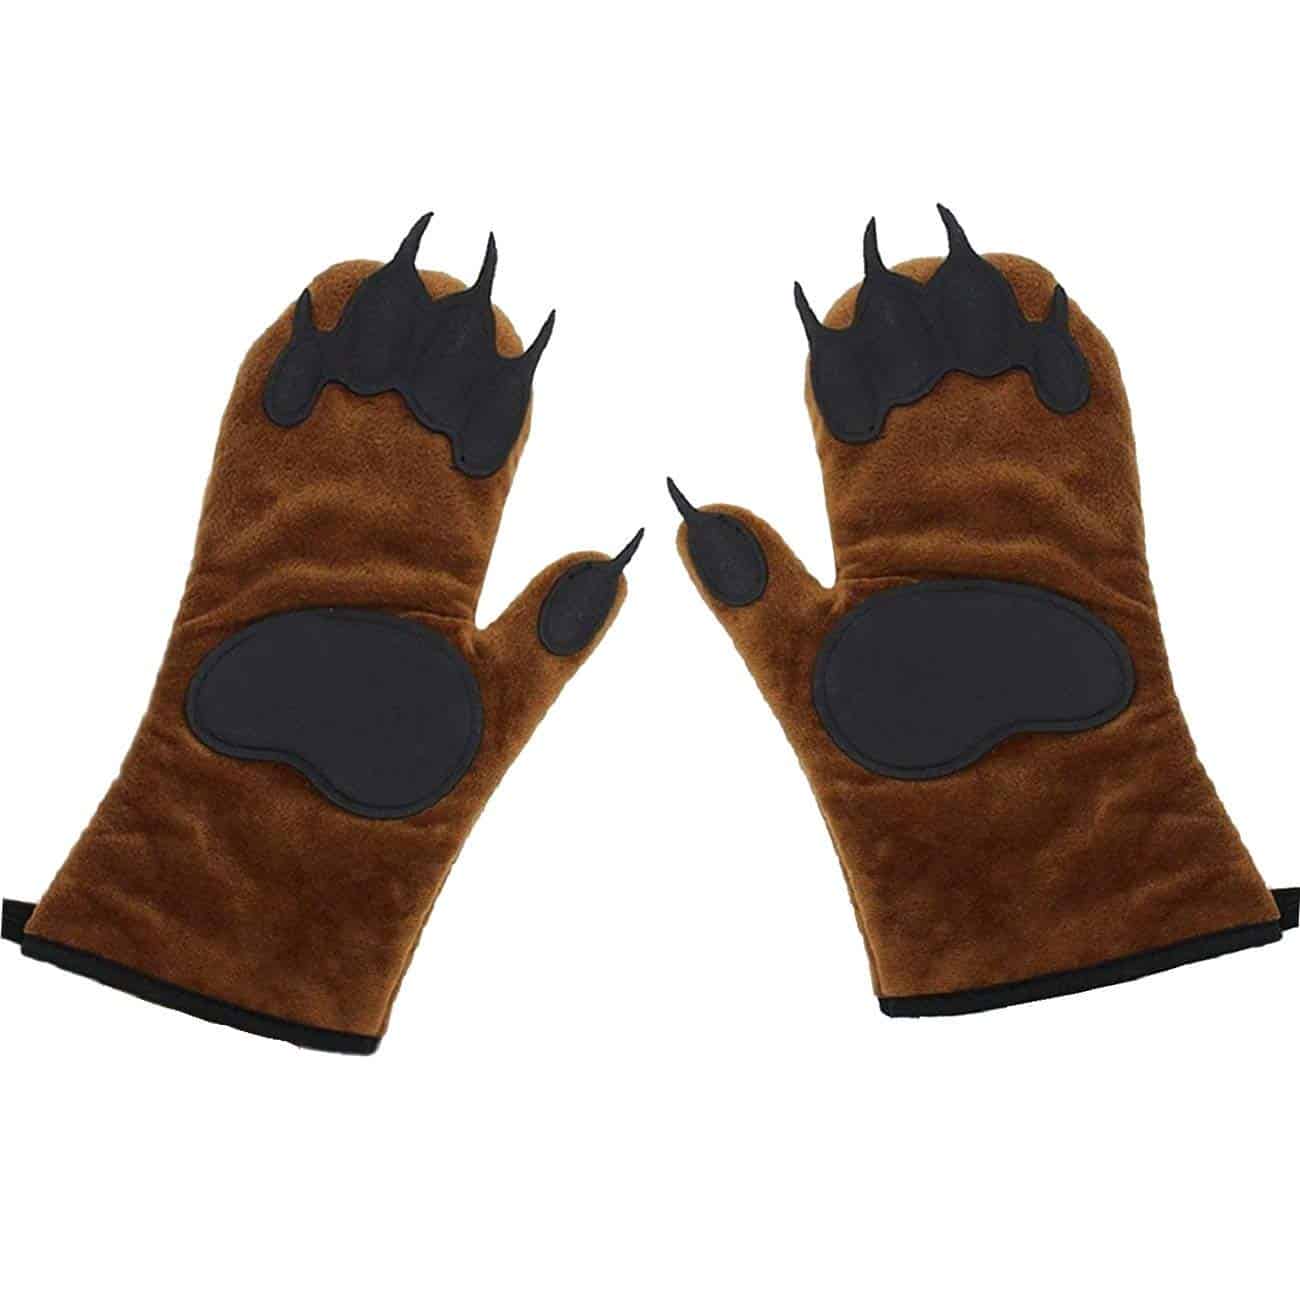 Where To Buy and Find Funny Oven Mitts